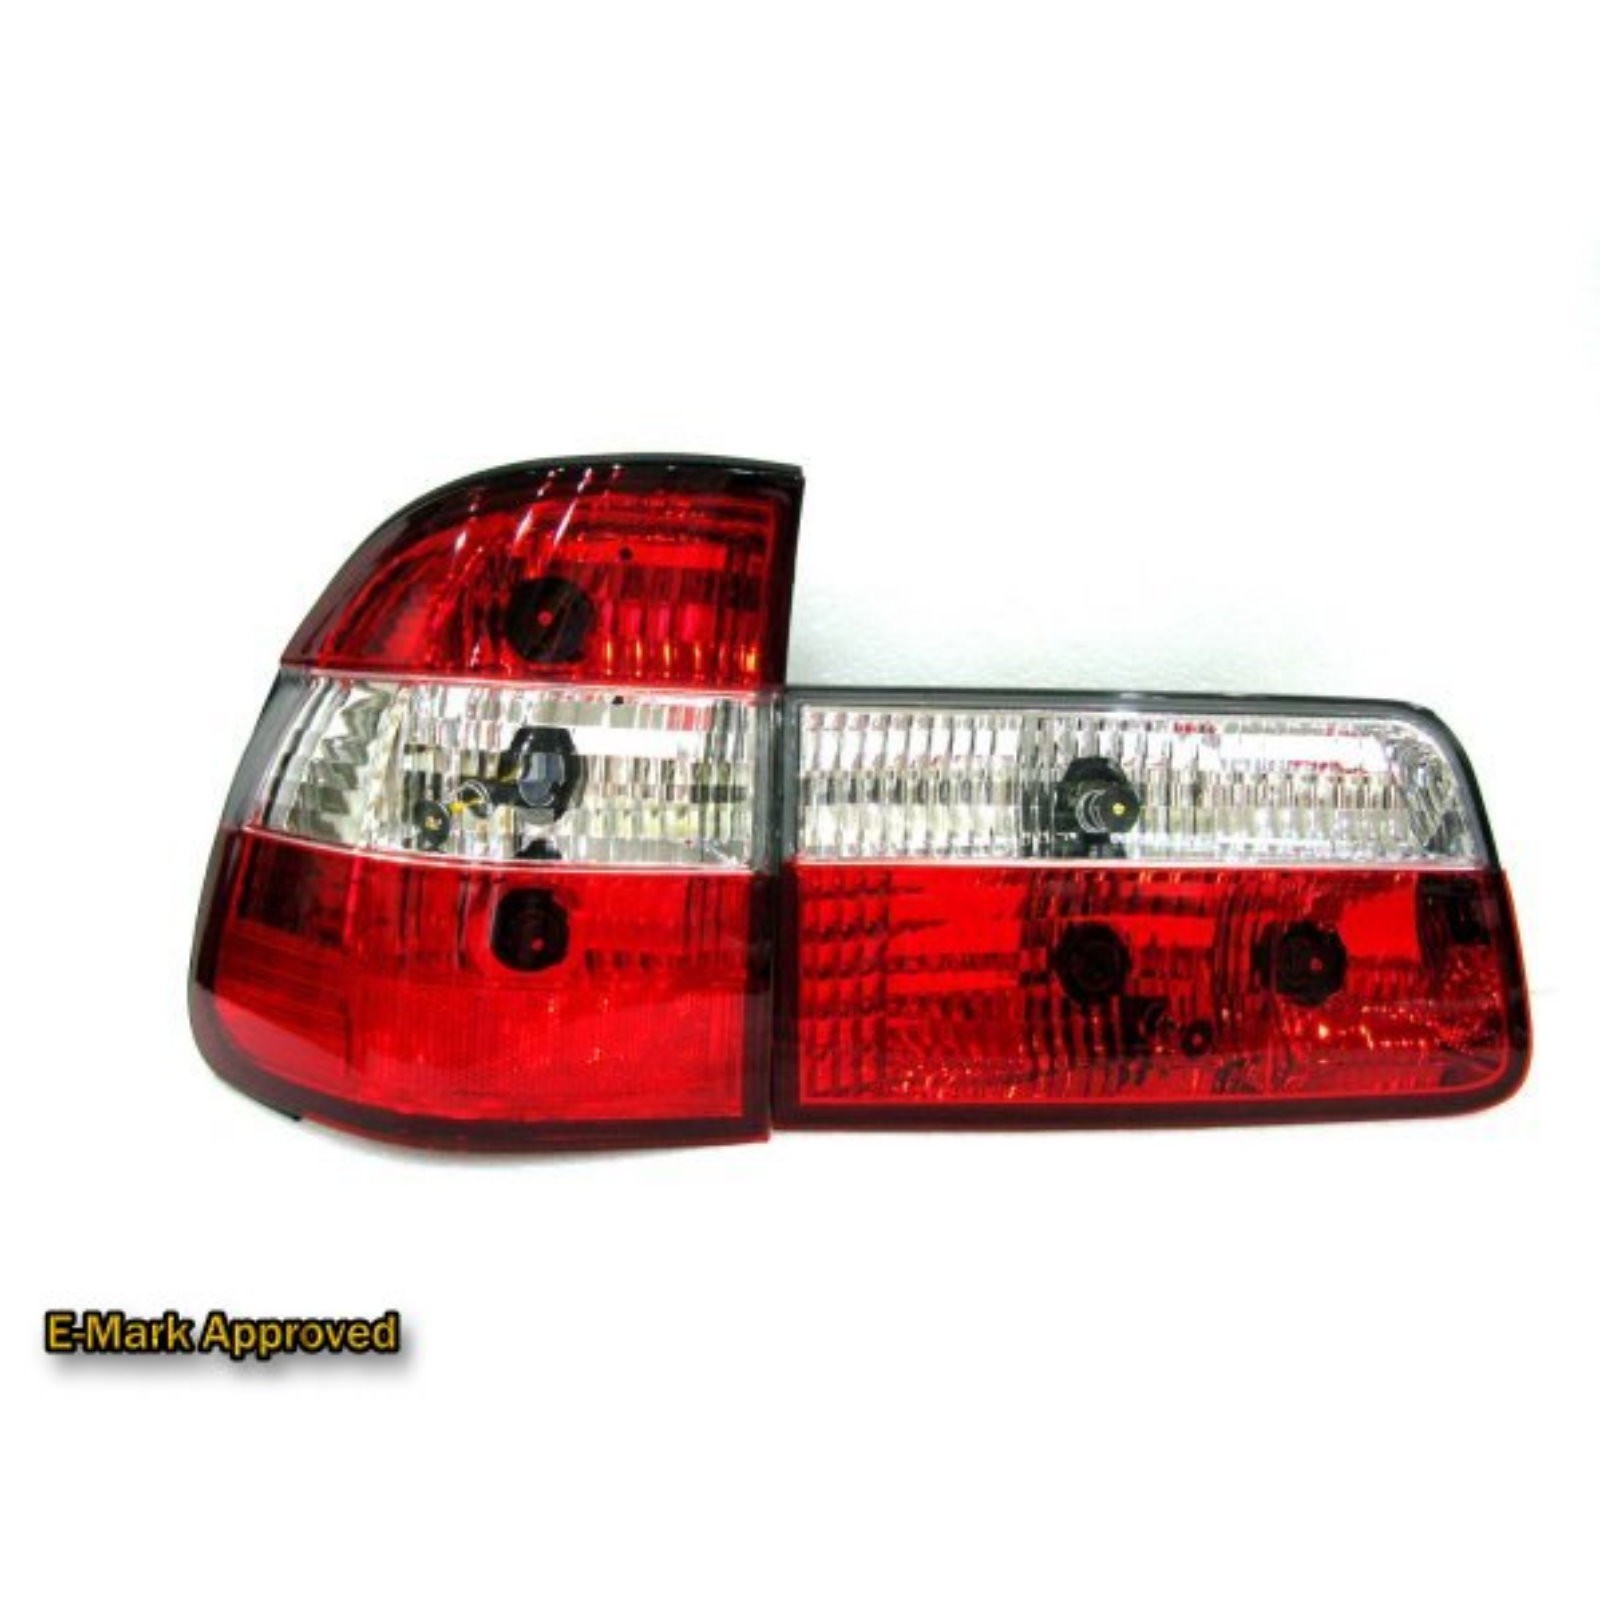 CrazyTheGod 5-Series E39 1995-2000 Wagon 5D Clear Tail Rear Light Red/White for BMW